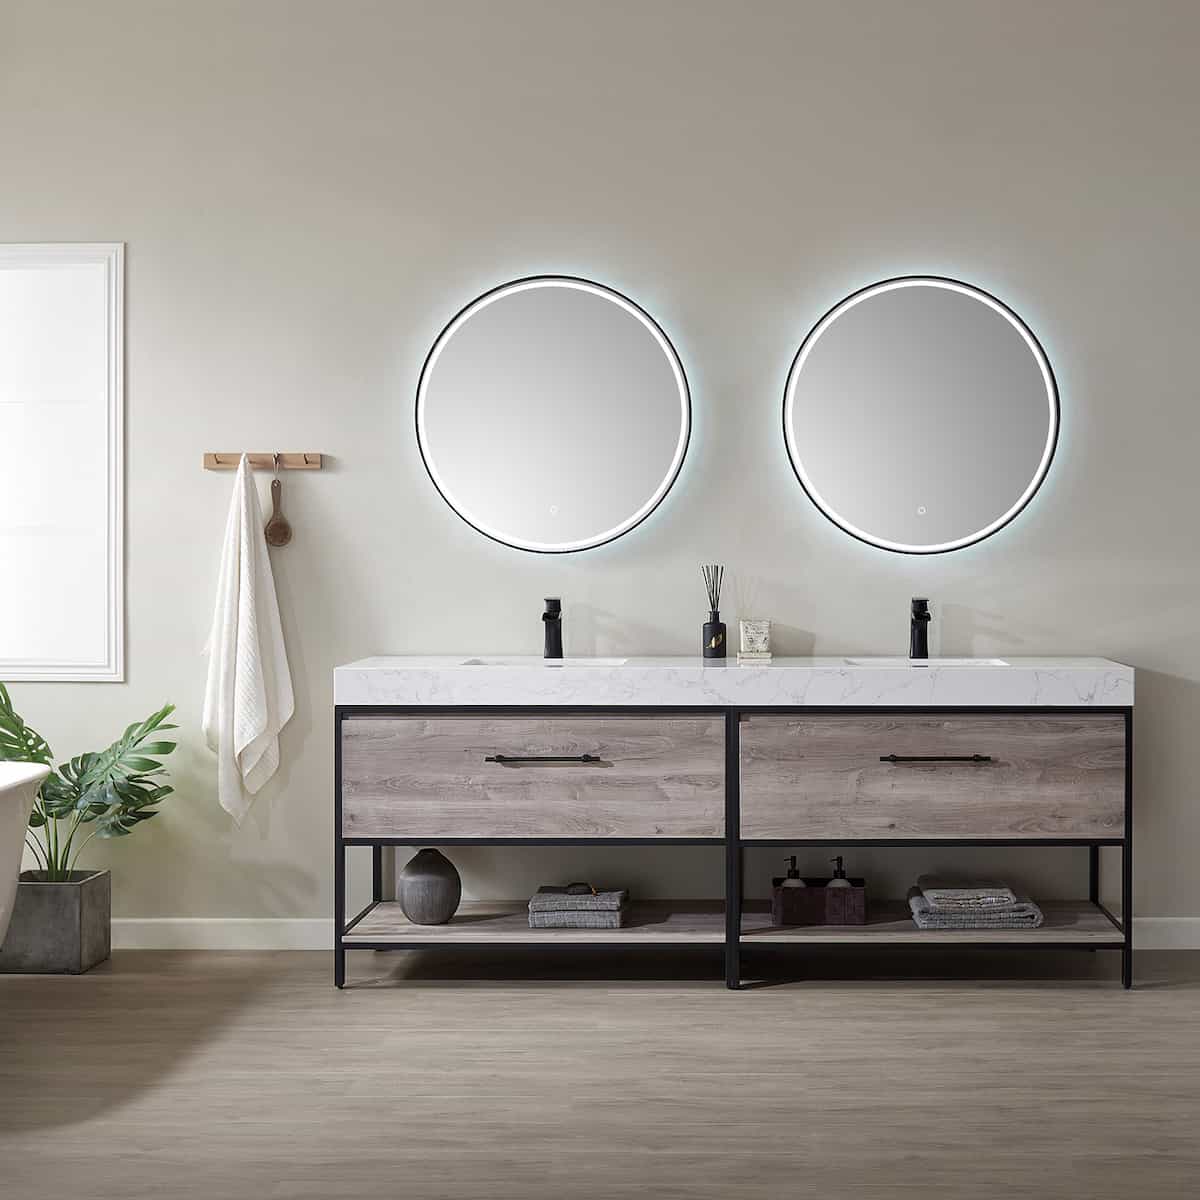 Vinnova Palma 84 Inch Freestanding Double Vanity in Mexican Oak with White Composite Grain Stone Countertop With Mirrors Bathroom 701284-MXO-GW